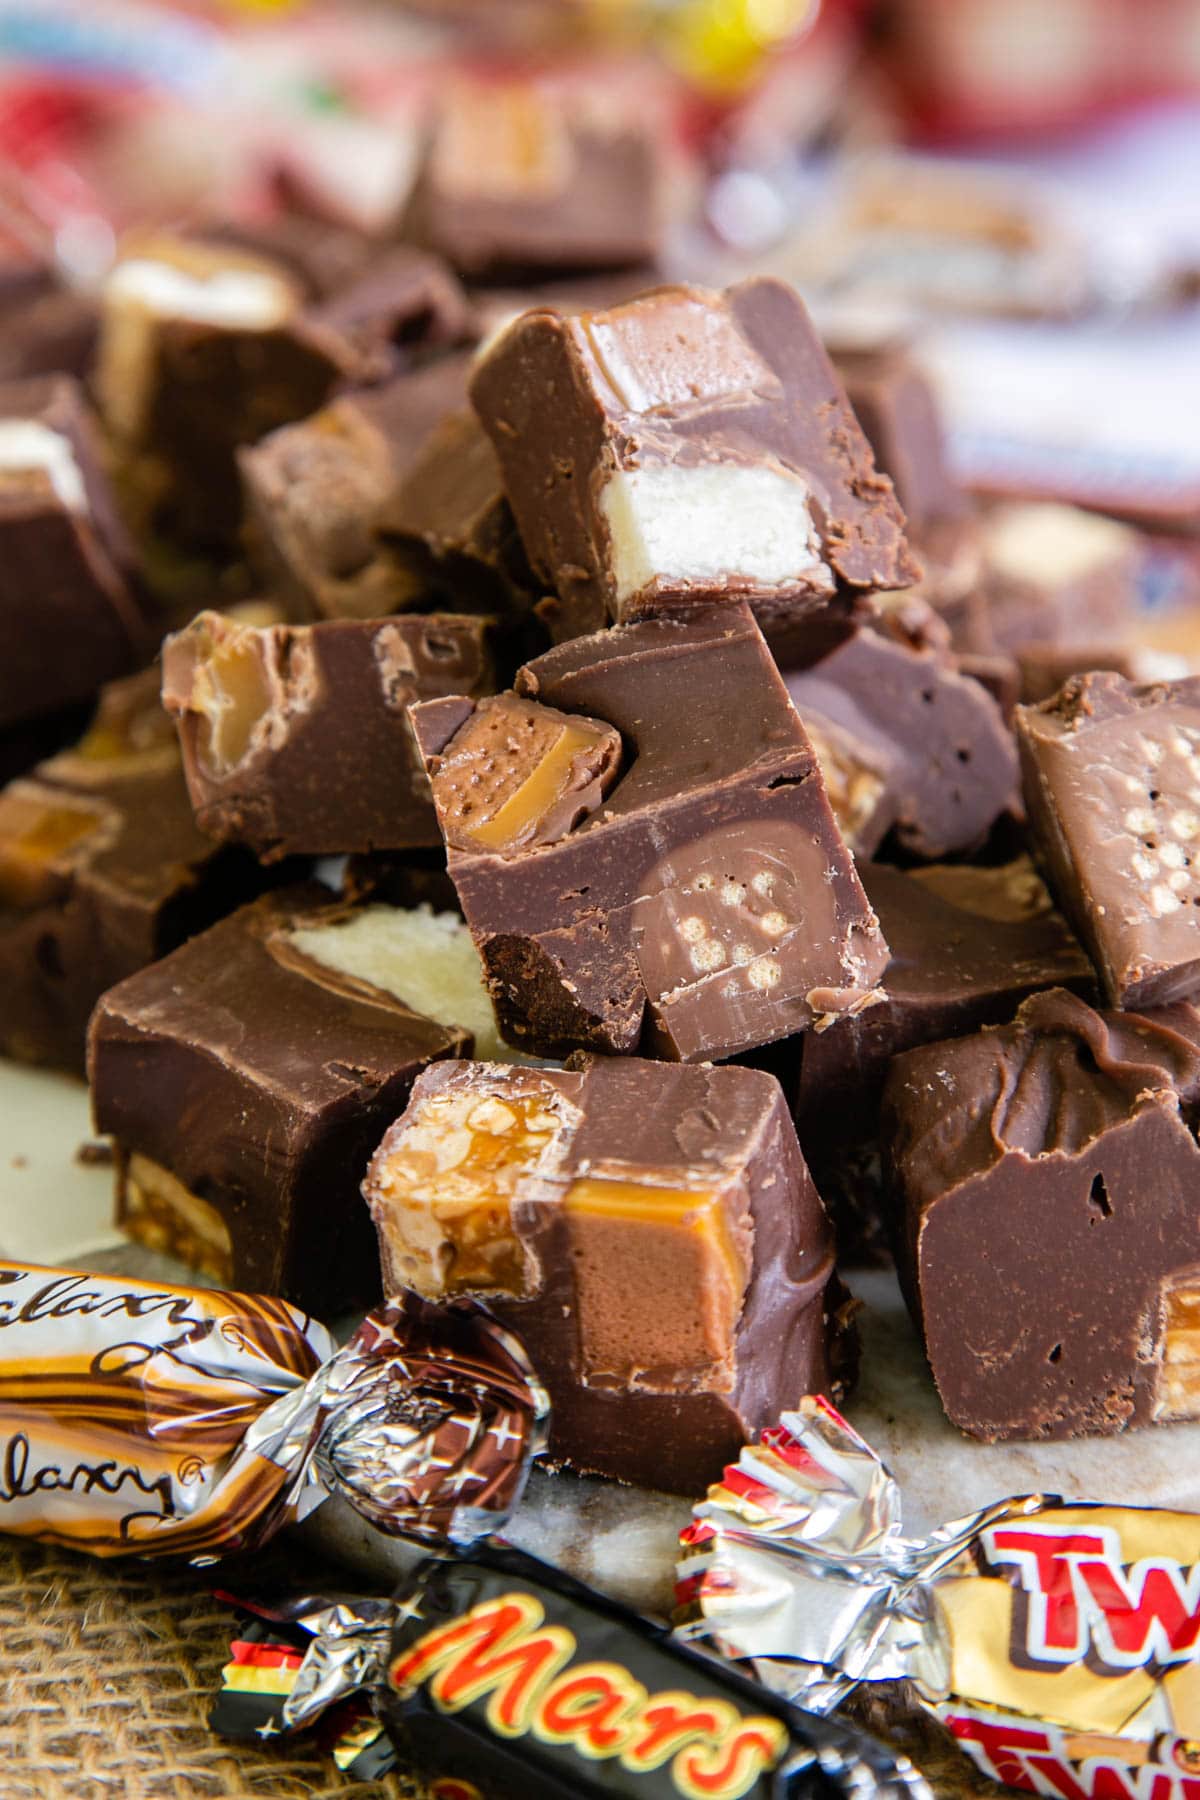 Leftover chocolates fudge cut into cubes, showing the fillings of the different chocolates inside.